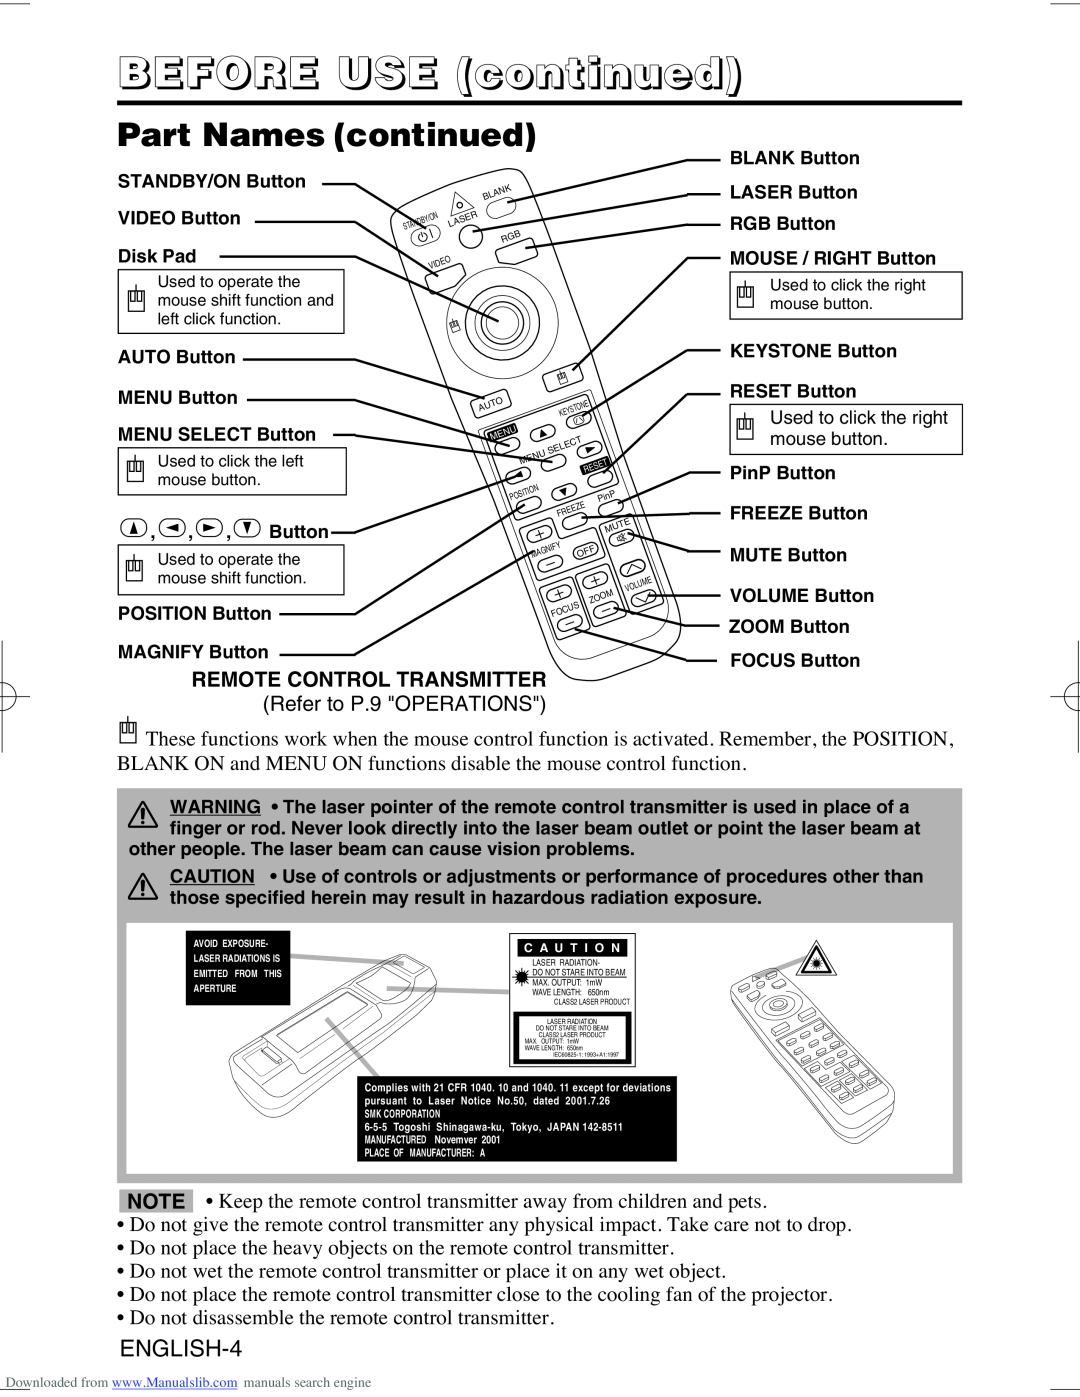 Hitachi CP-X995W user manual Part Names continued, BEFORE USE continued, ENGLISH-4 